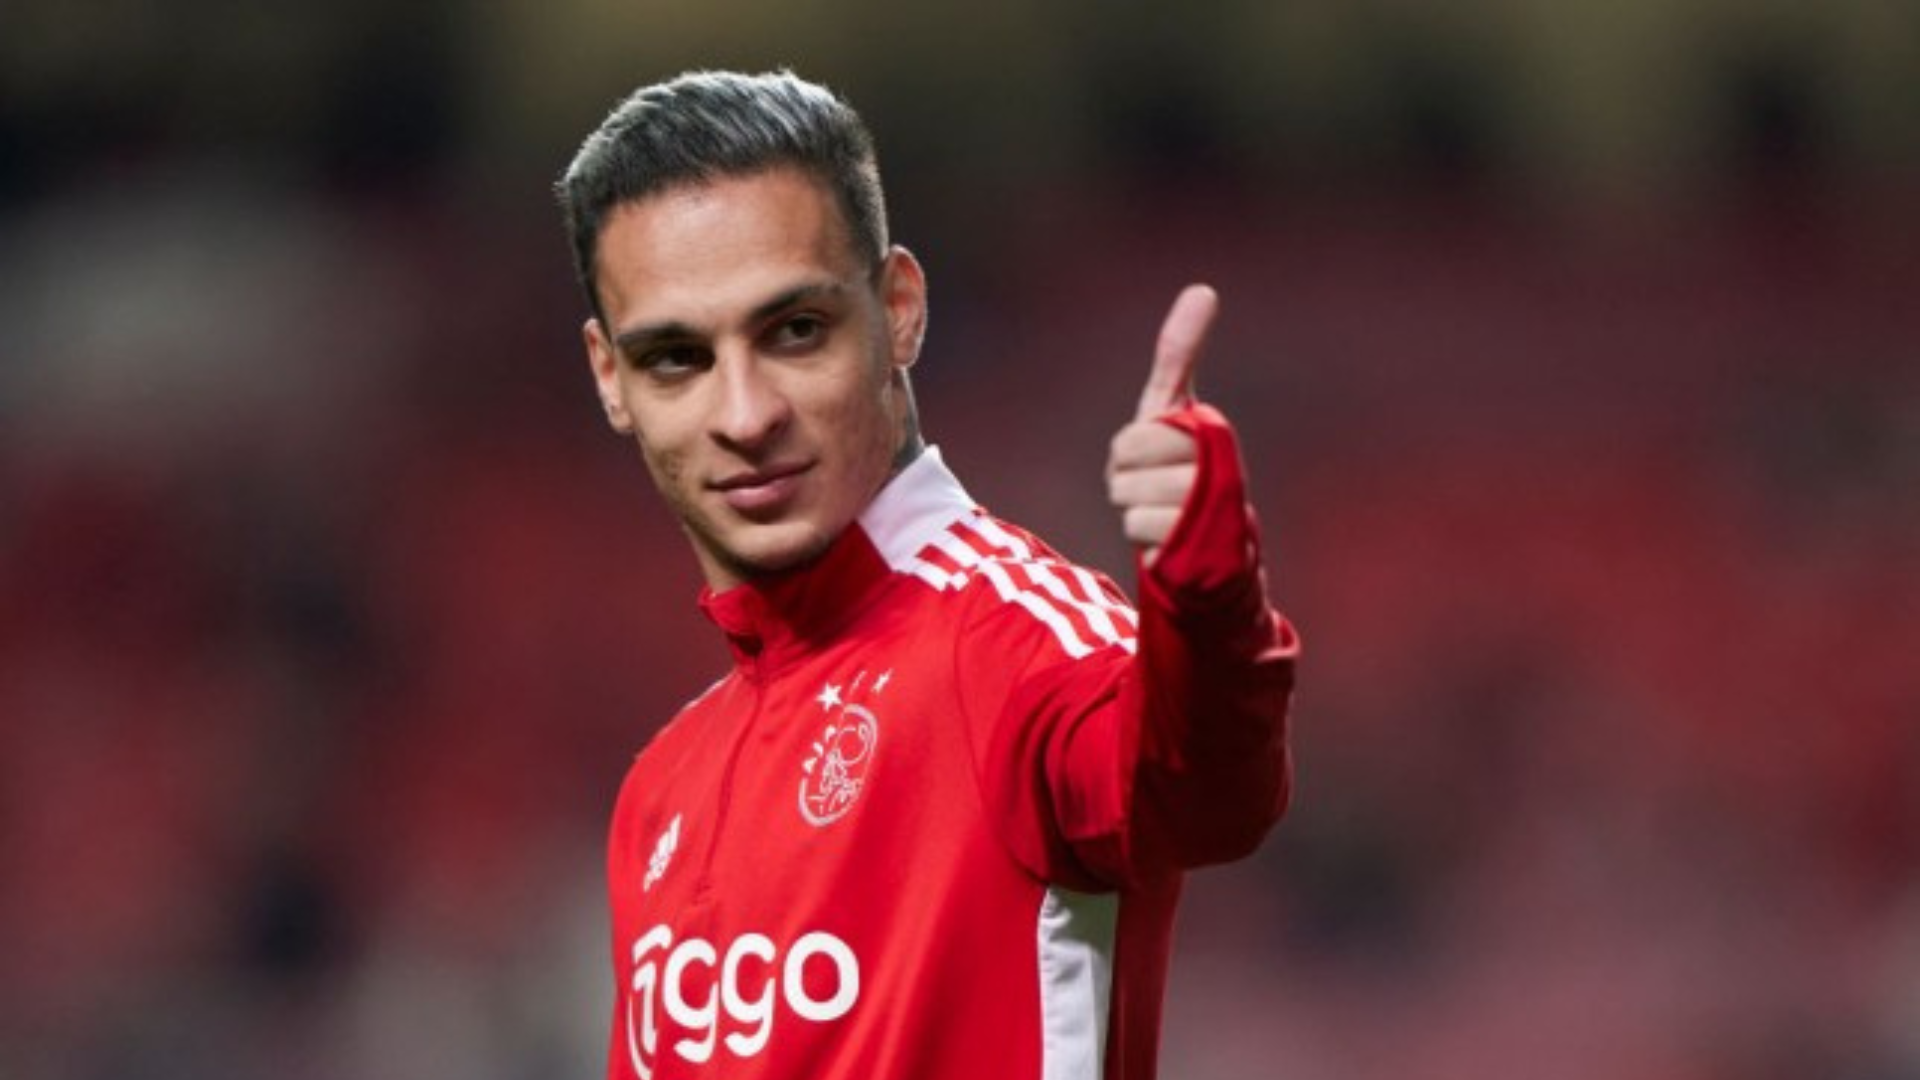 Ajax Winger Antony wearing red and white jacket and doing thumbs up hand gesture